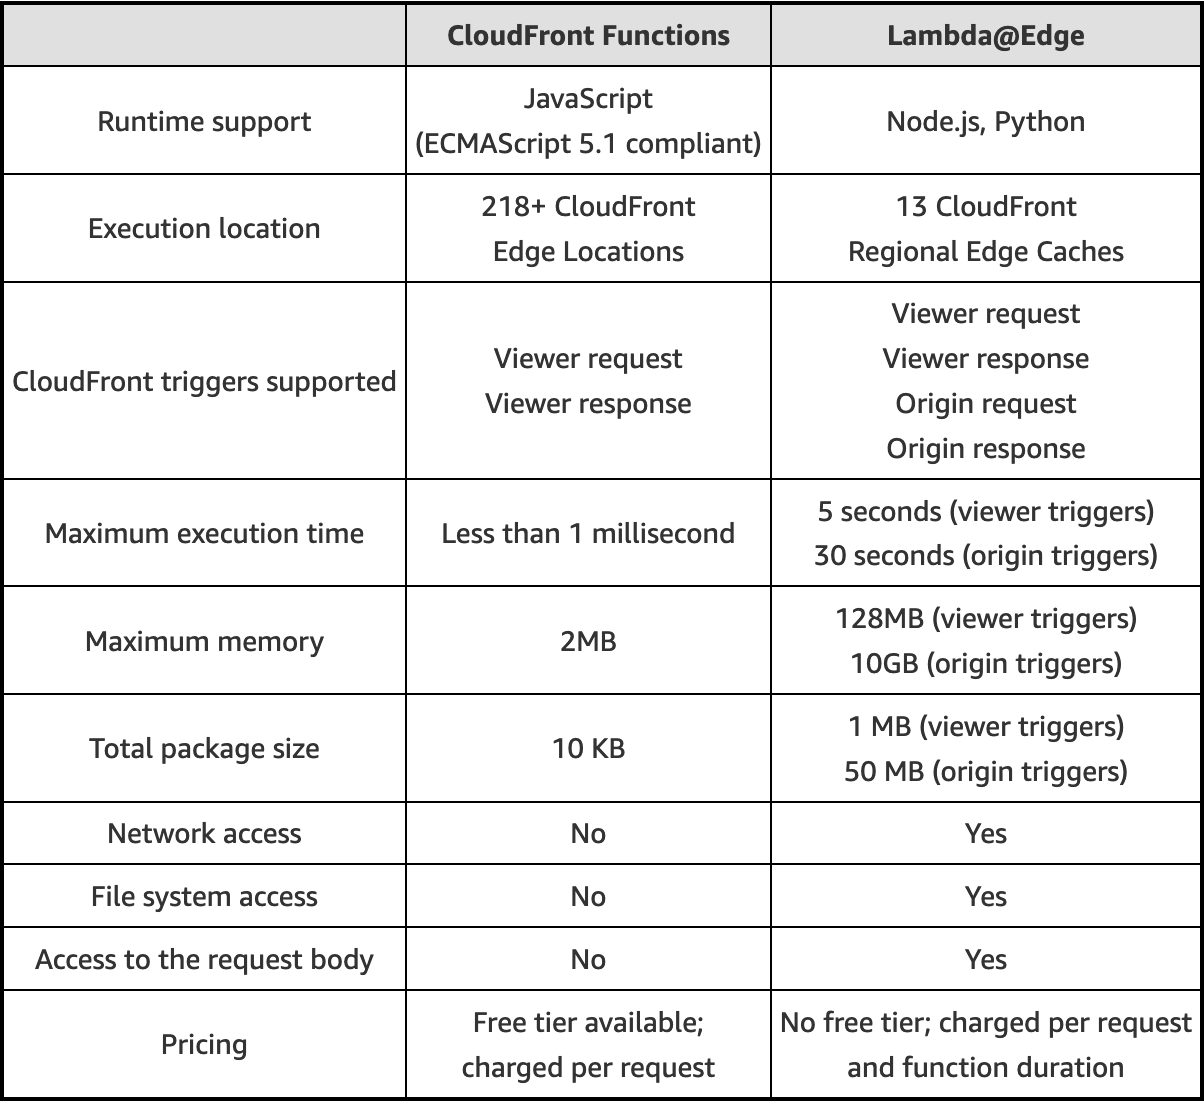 Comparison table between CloudFront Functions and Lambda@Edge